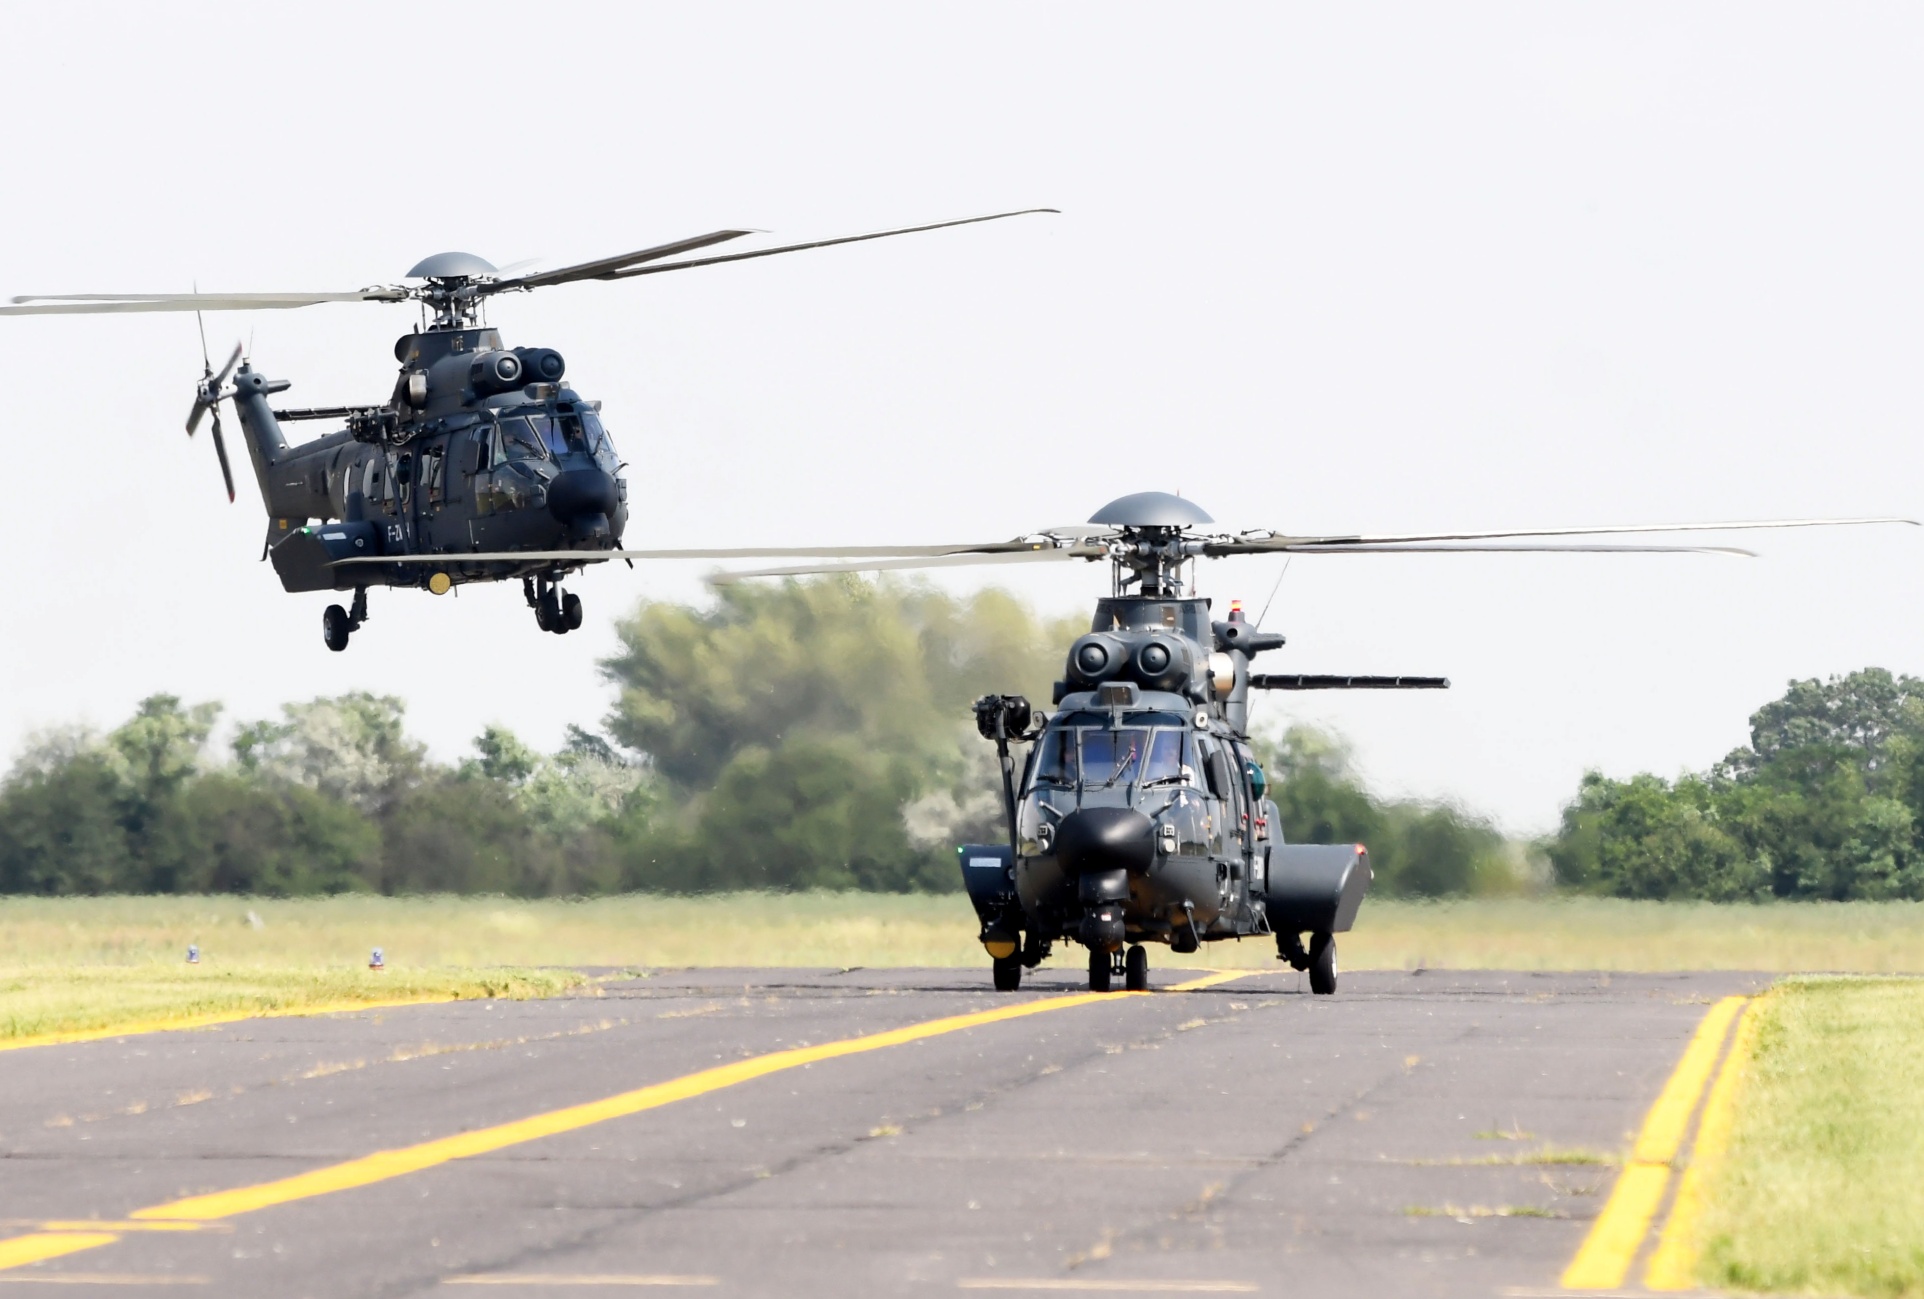 The Air Force's New State-of-the-art Helicopters Have Landed